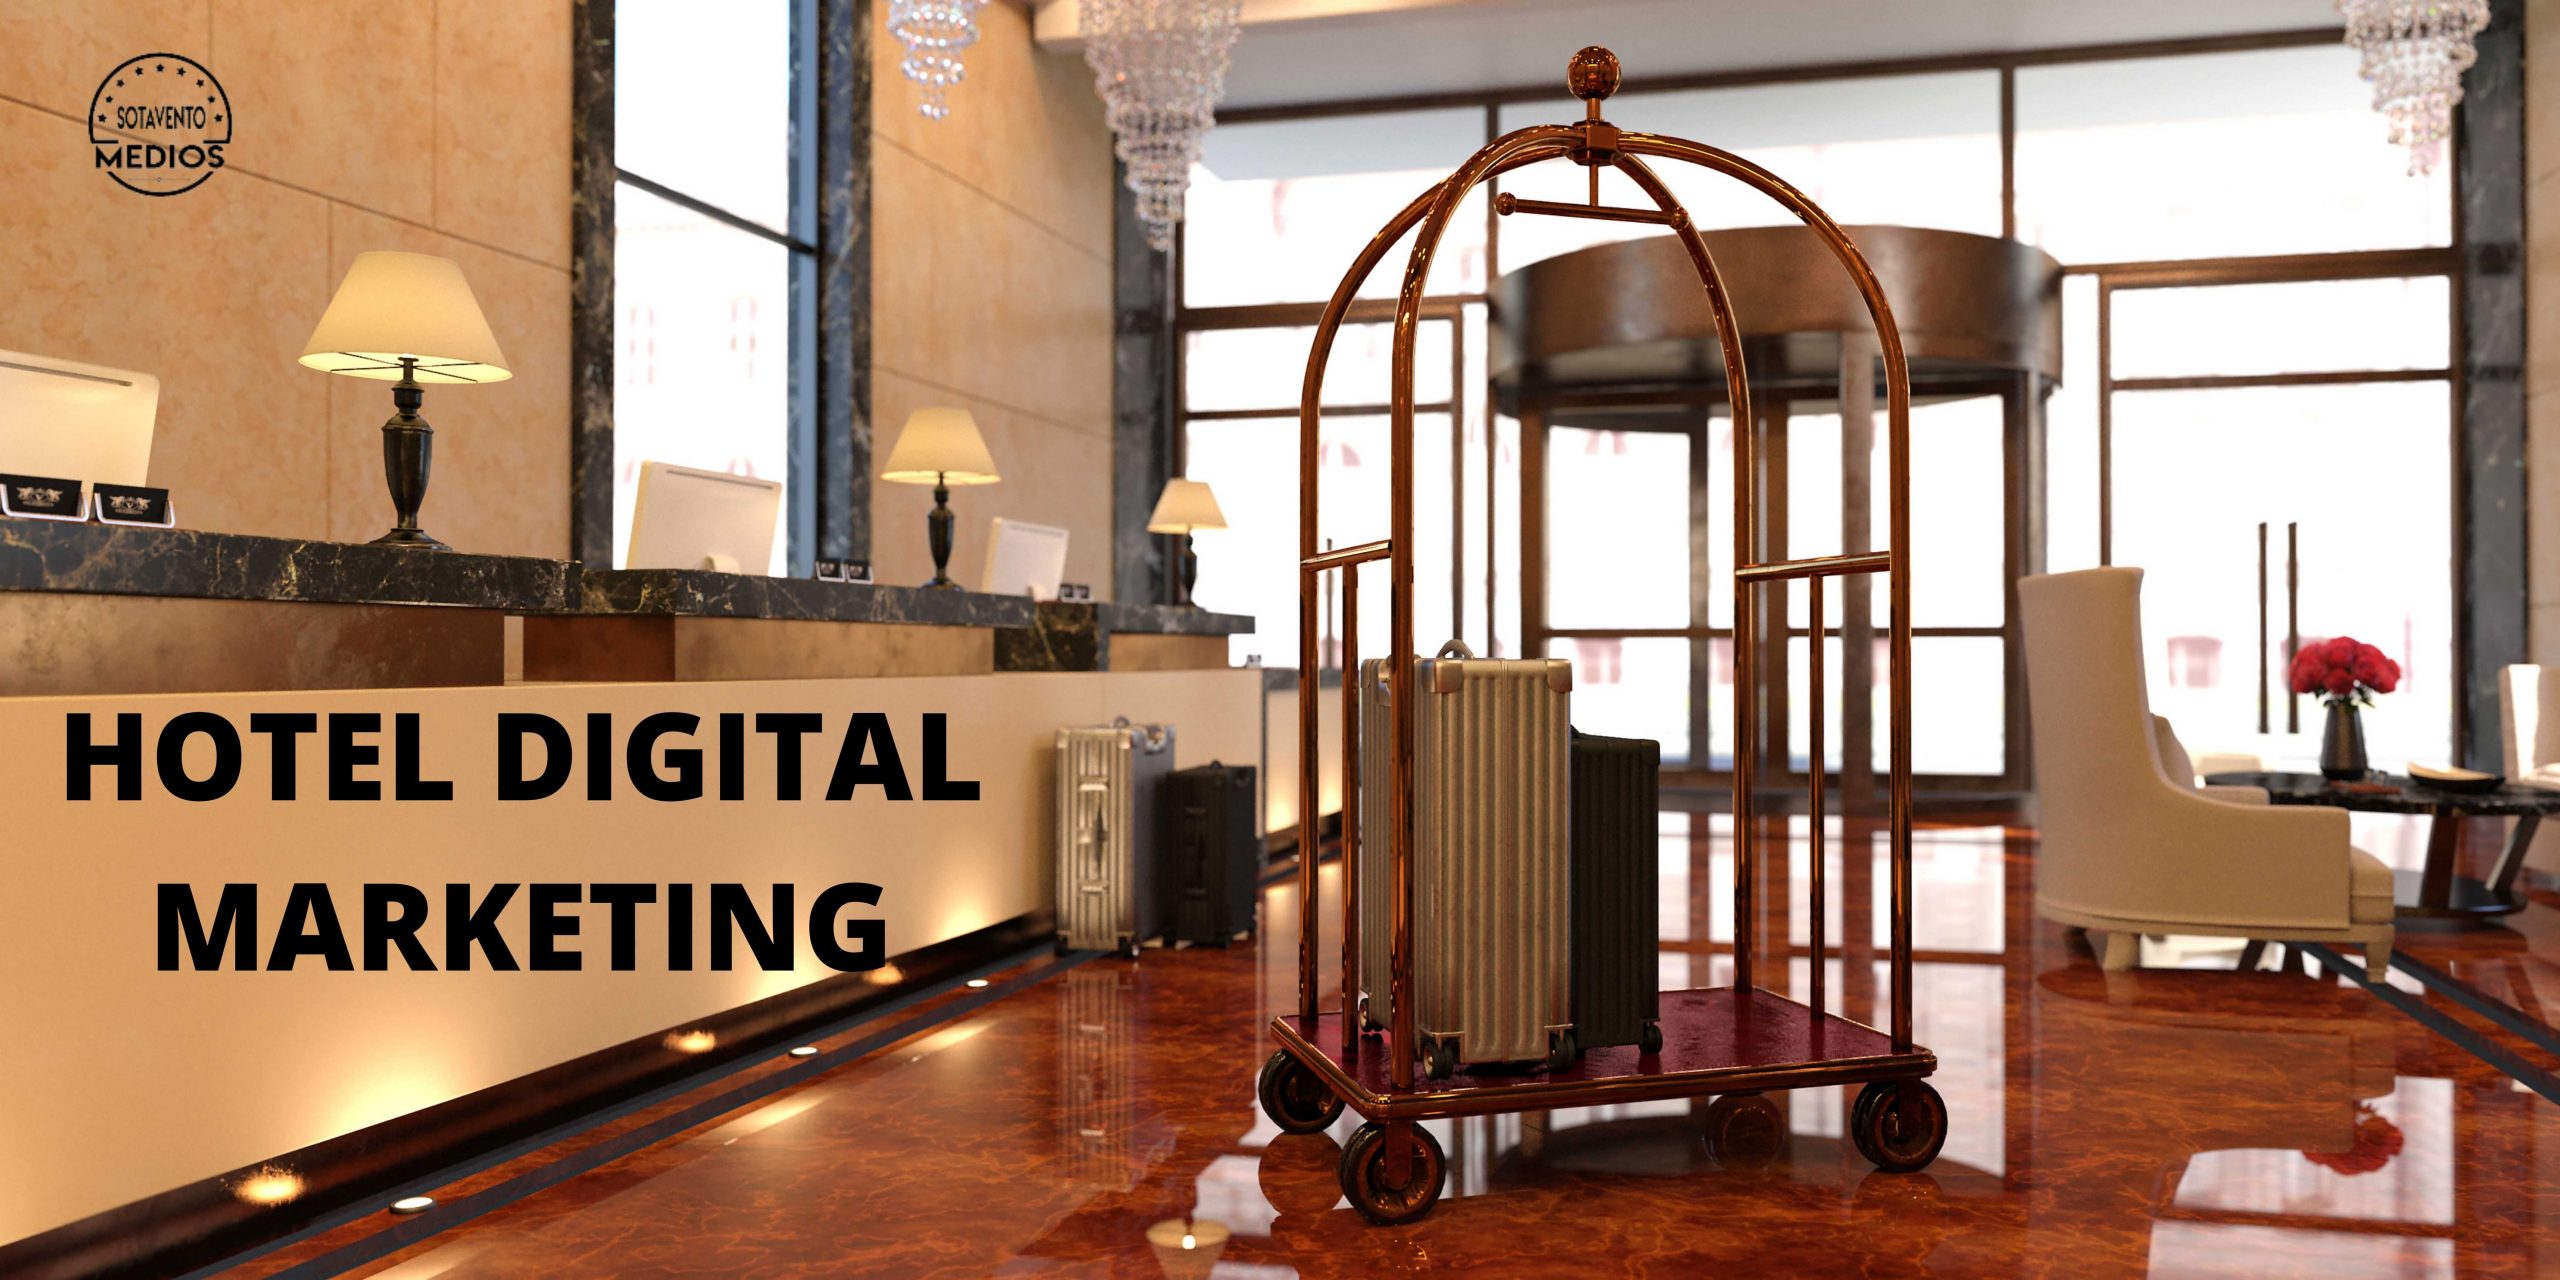 Hotel Digital Marketing: How to Attract More Customers and Increase Revenue